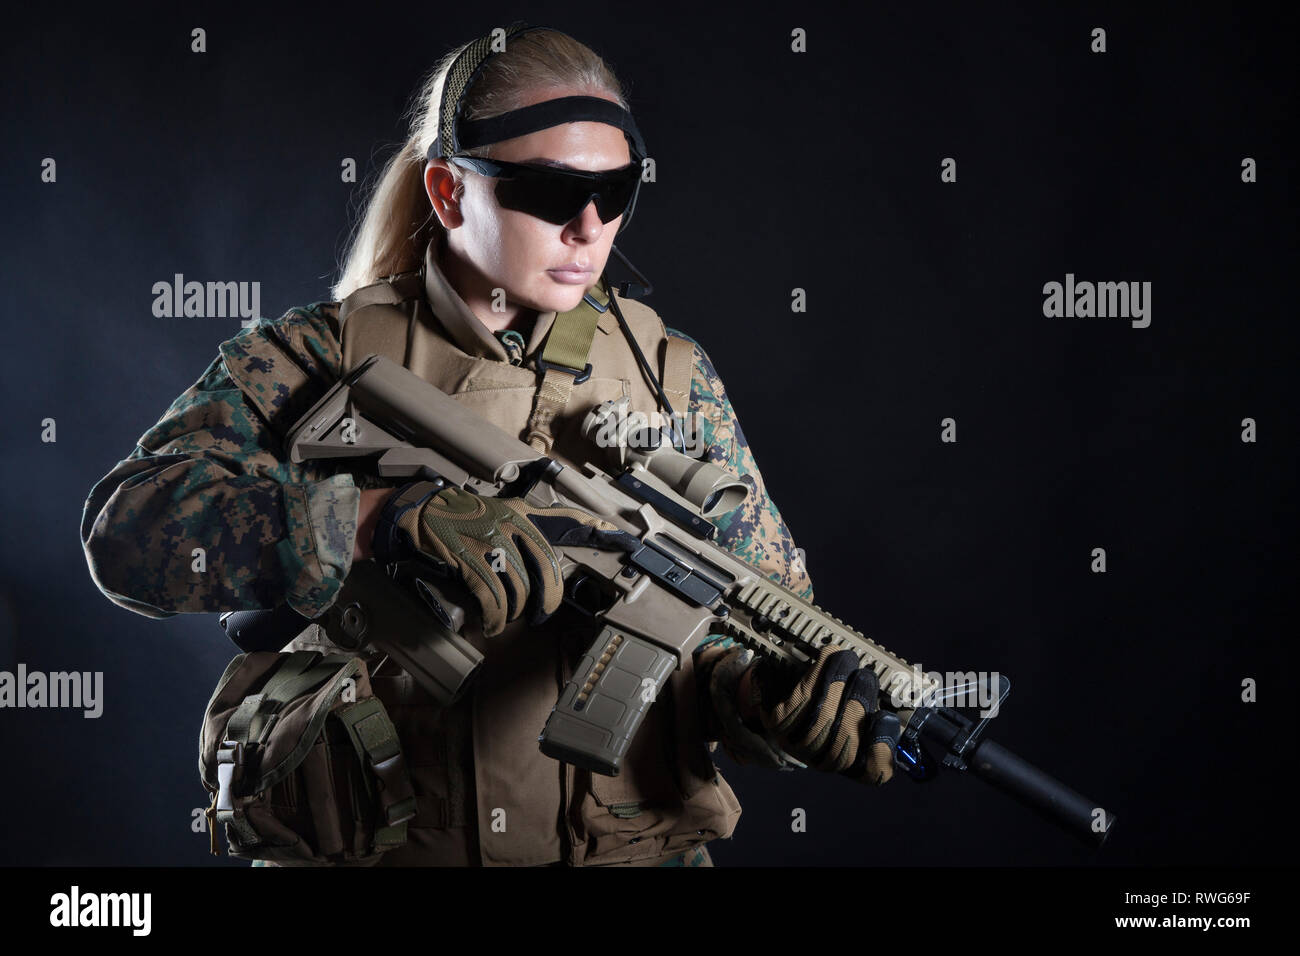 Portrait of Female United States Marine Corps Soldier in utility